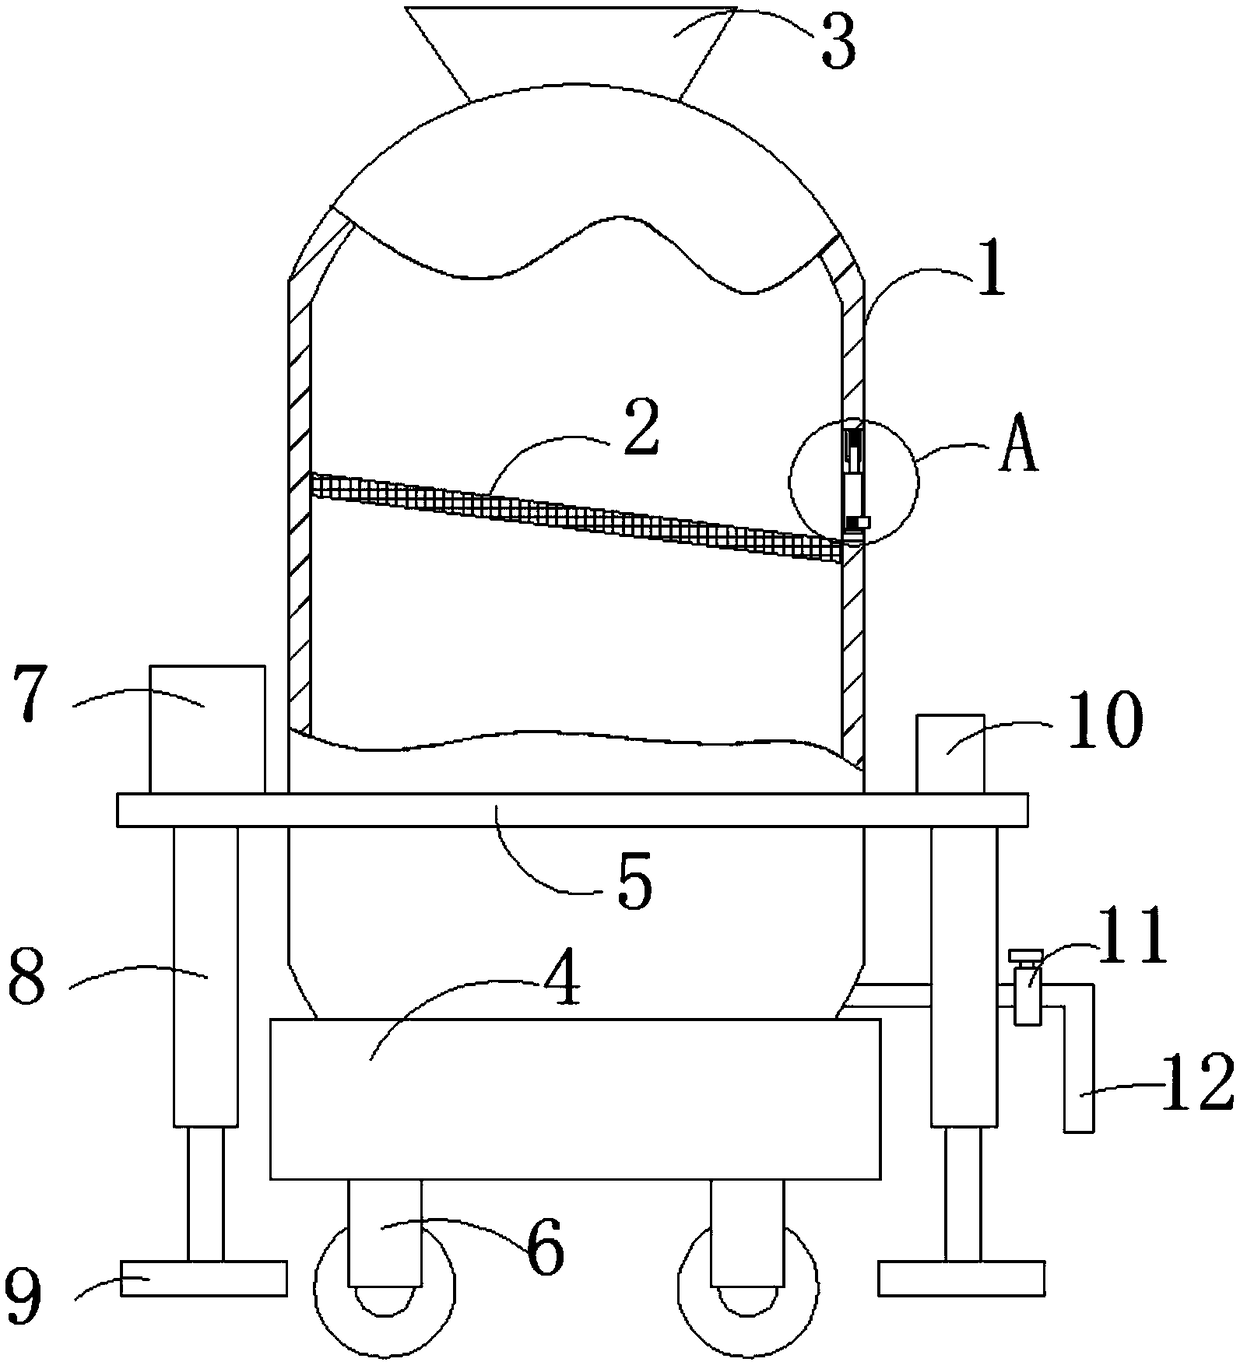 Chemical waste storing tank facilitating solid and liquid separation